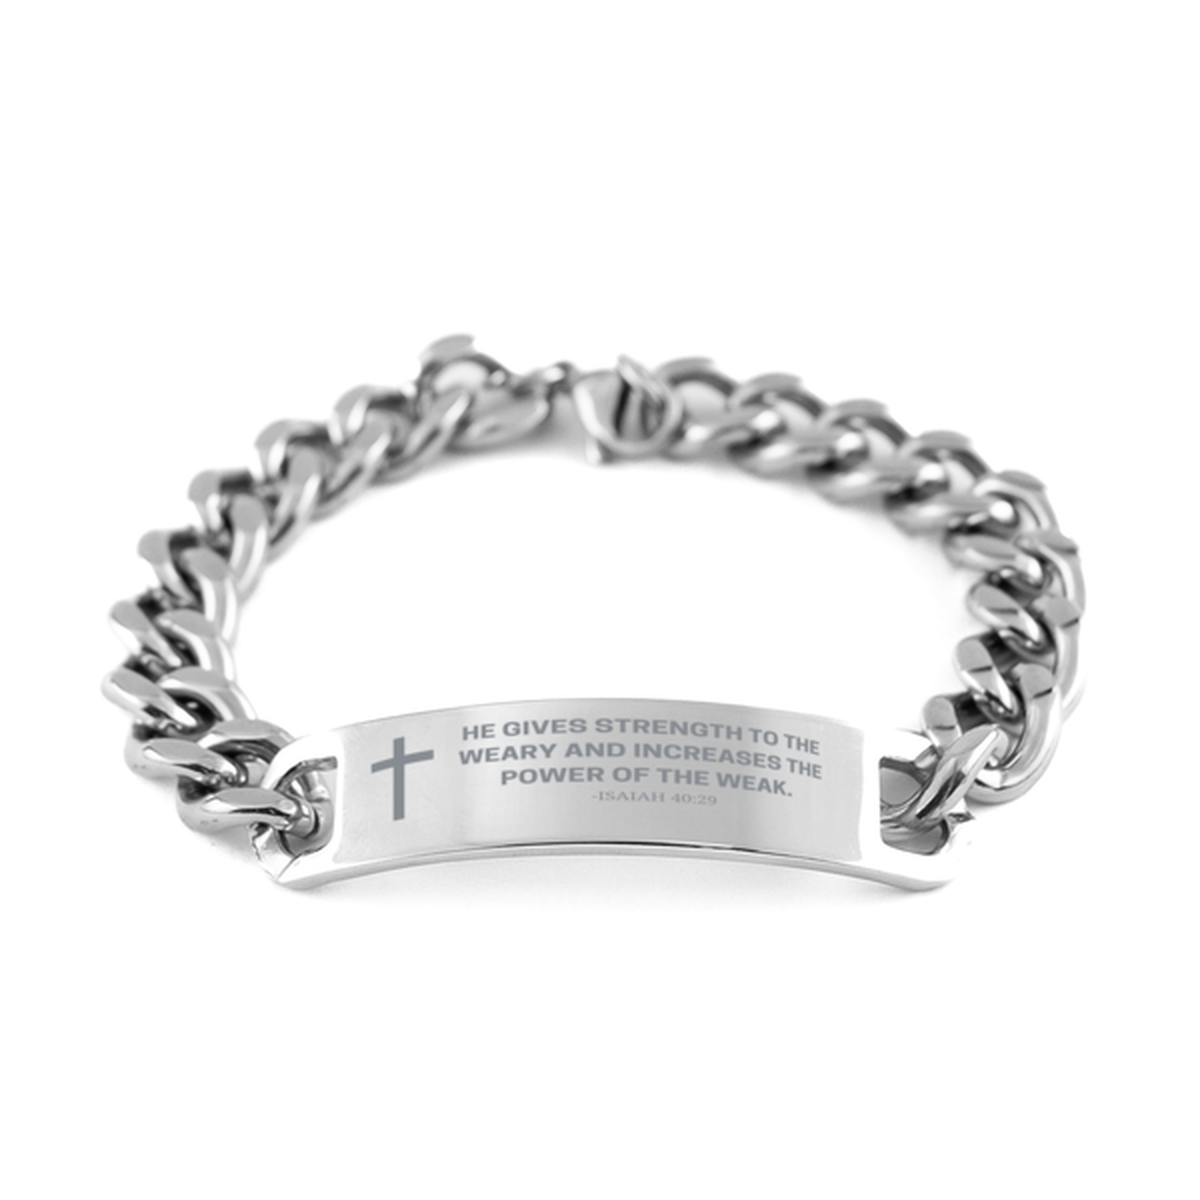 Baptism Gifts For Teenage Boys Girls, Christian Bible Verse Cuban Chain Bracelet, He gives strength to the weary, Catholic Confirmation Gifts for Son, Godson, Grandson, Nephew